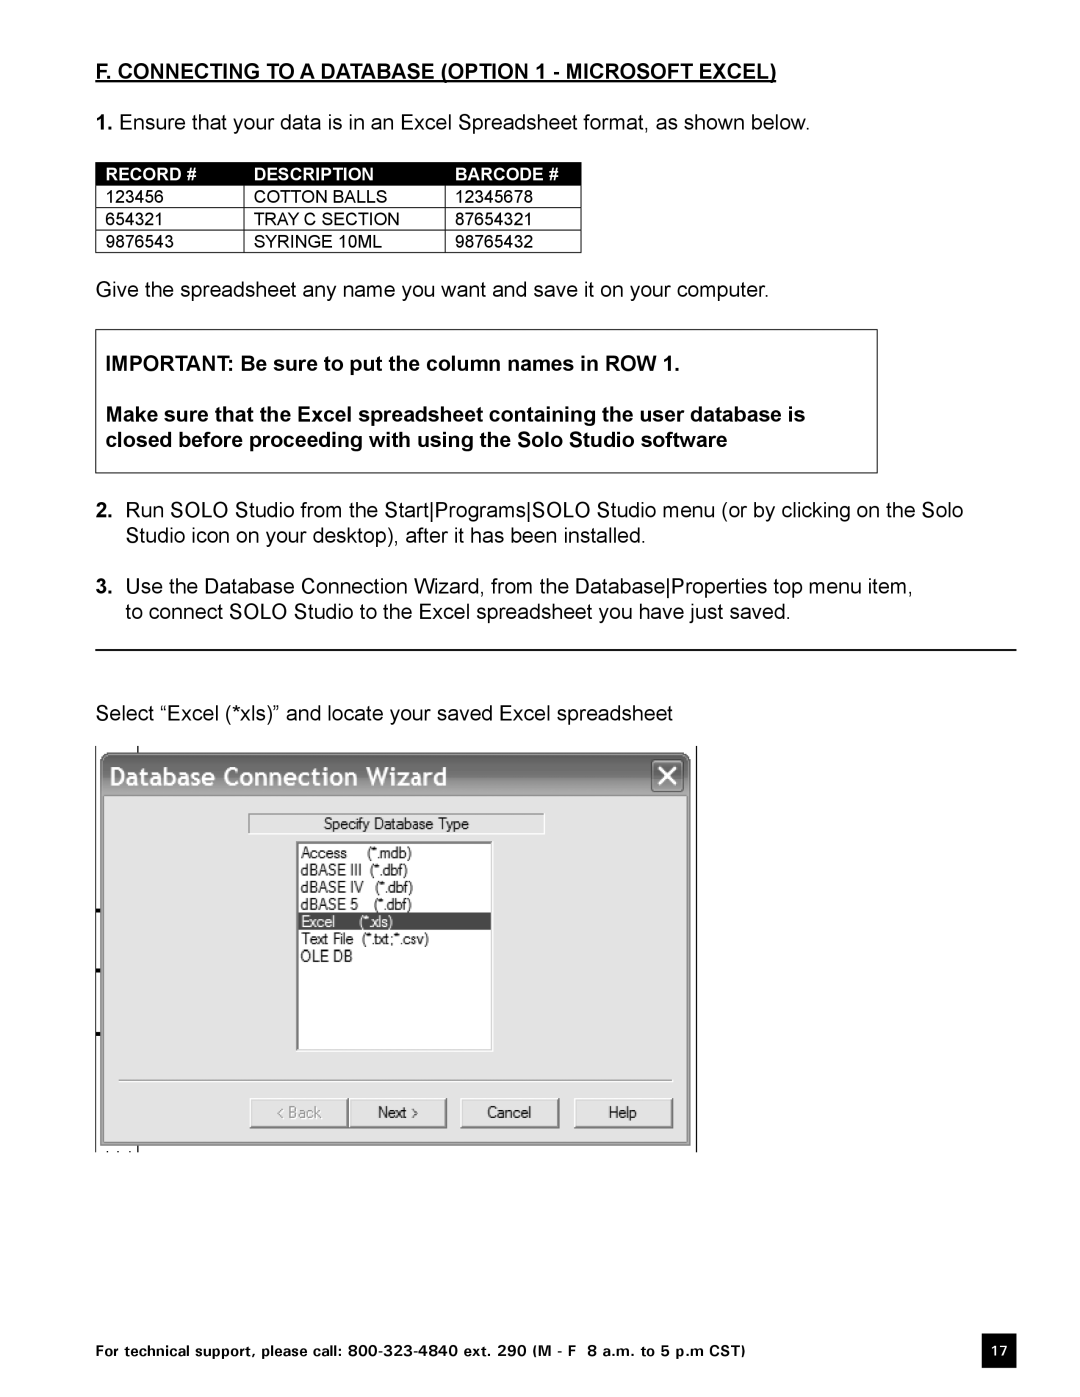 Keystone Computer Keyboard manual F. Connecting to a database Option 1 - Microsoft Excel 